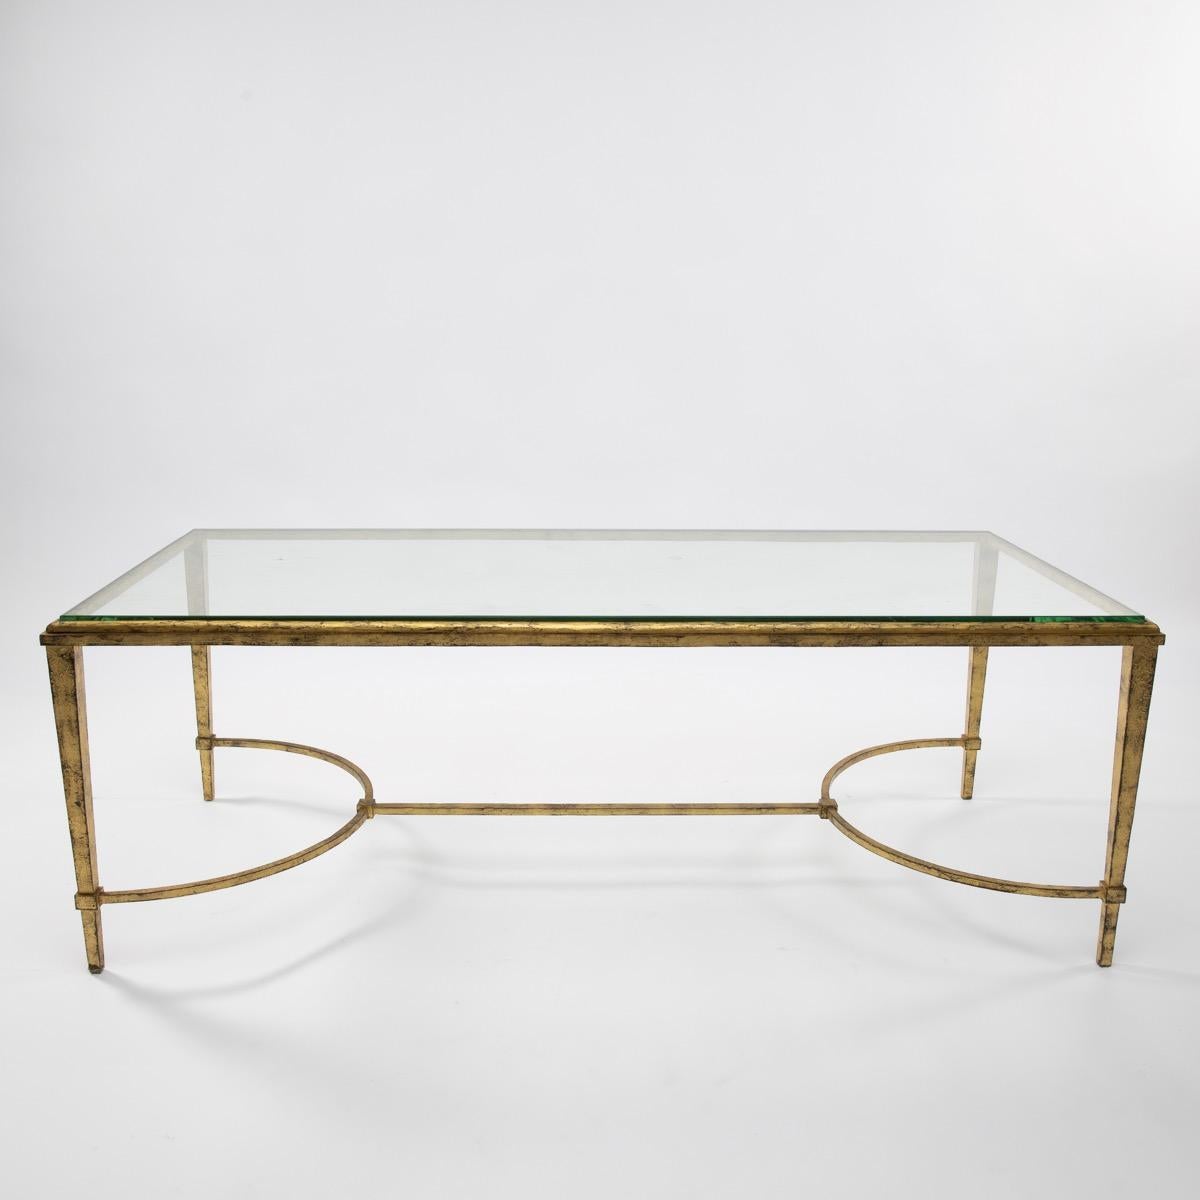 A midcentury golden iron cocktail or coffee table designed and manufactured by Maison Ramsay, Paris, France, circa 1950-1960. Very clean and sharp lines, the table structure is made from two thin semi-circular stretcher and a glass, all in beaten